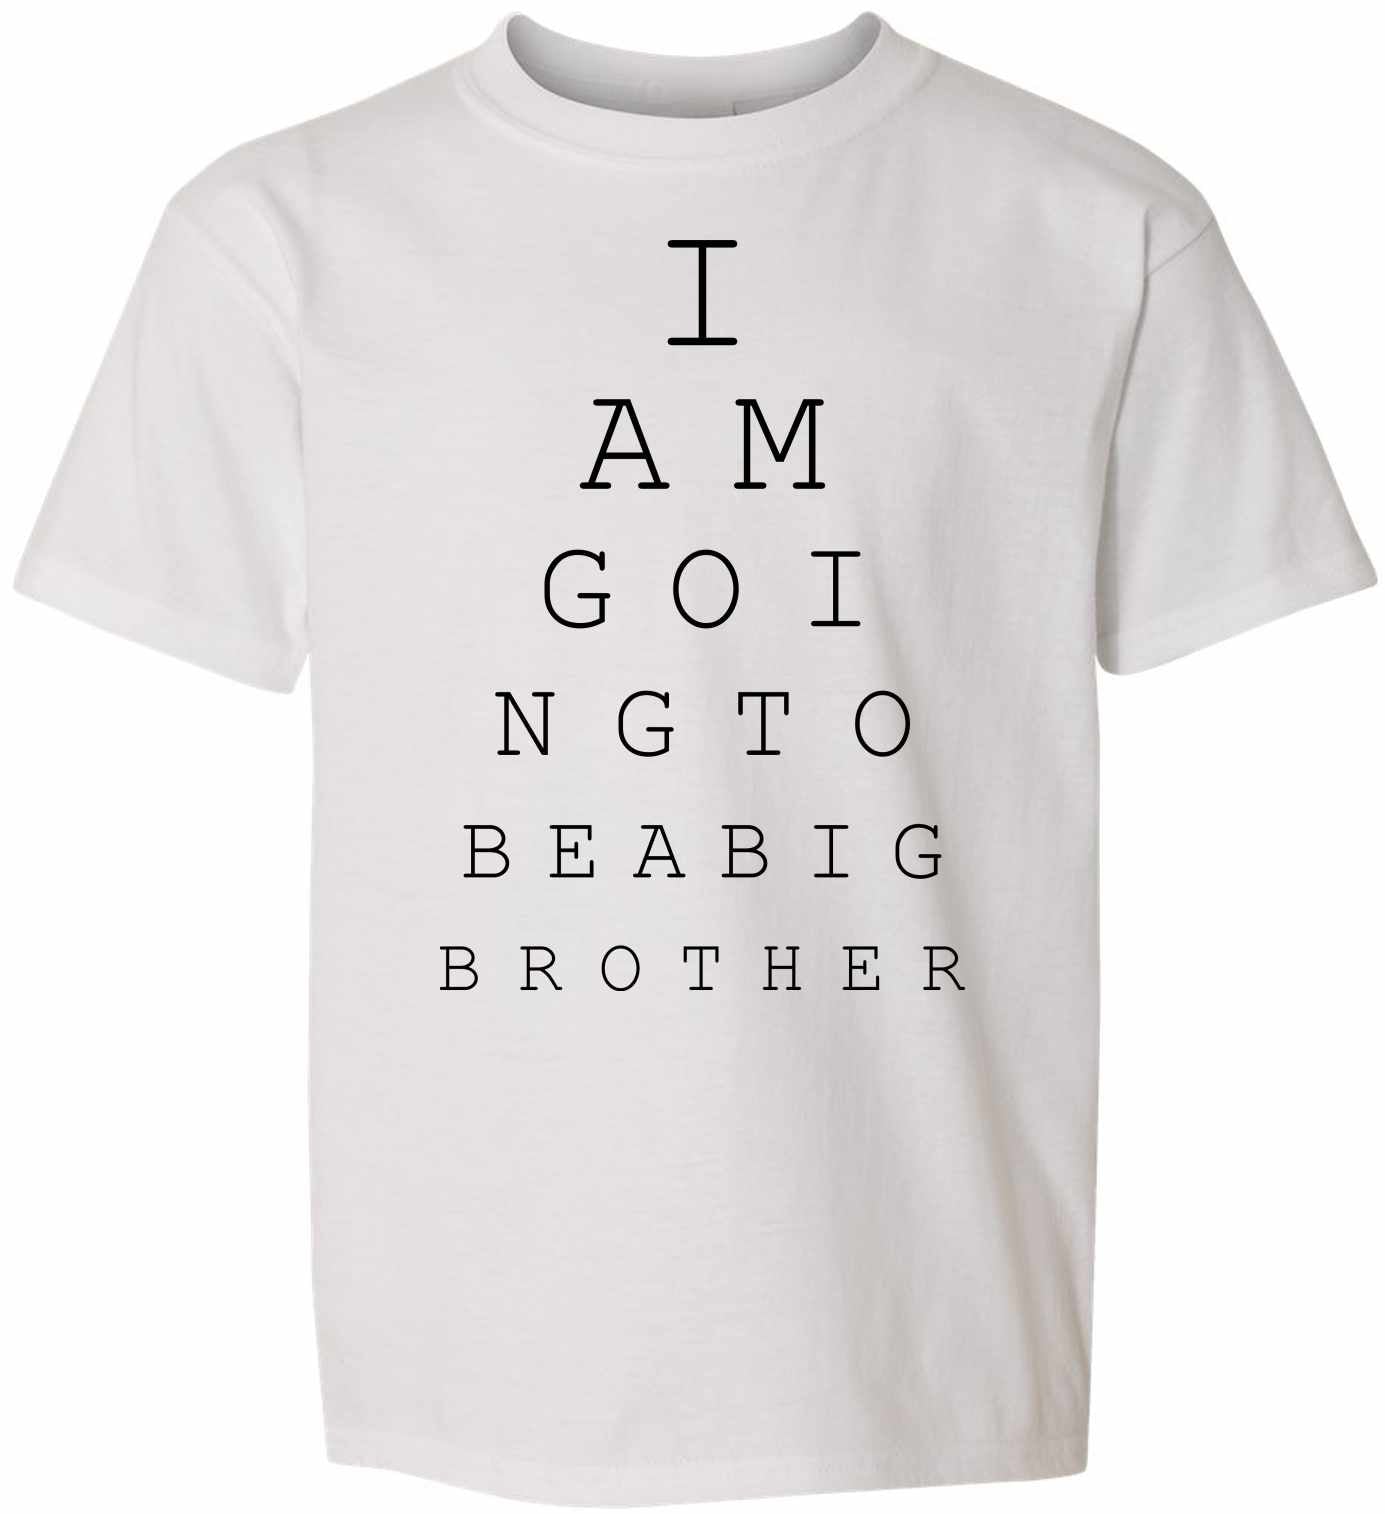 I AM GOING TO BE BIG BROTHER EYE CHART on Kids T-Shirt